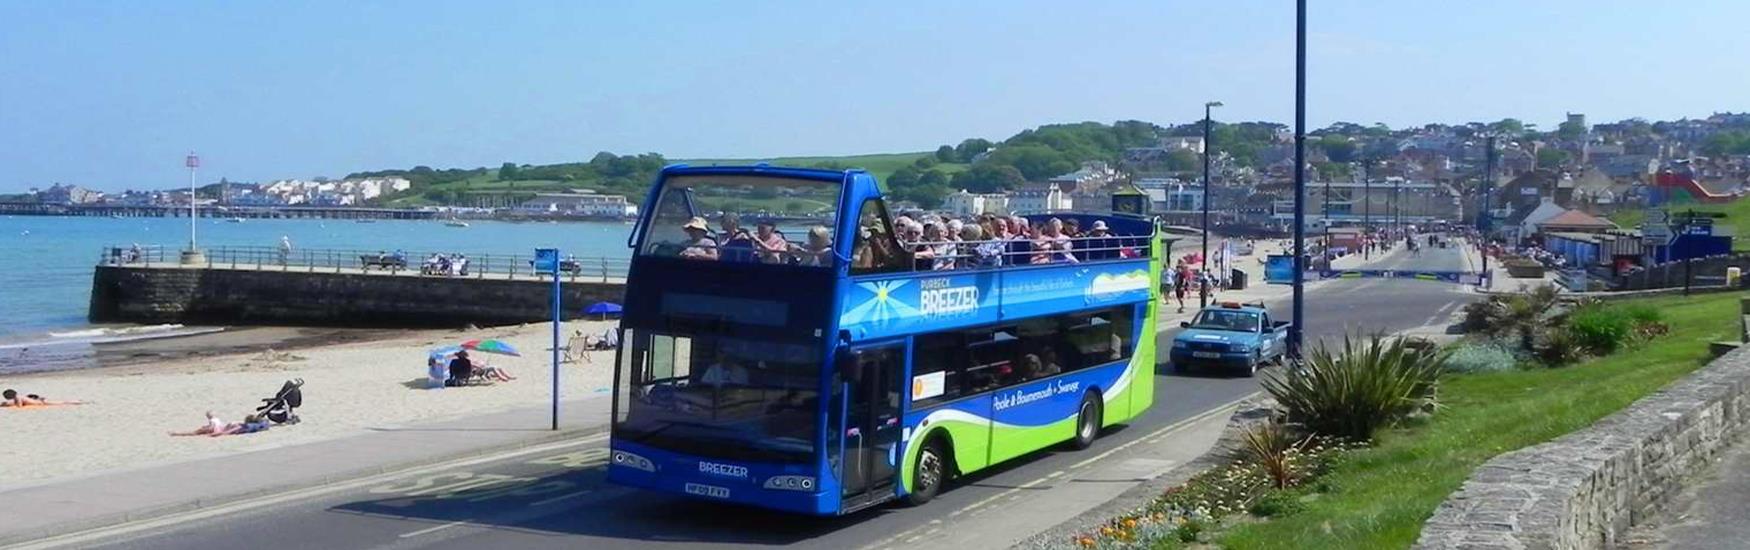 Take the open top to Swanage